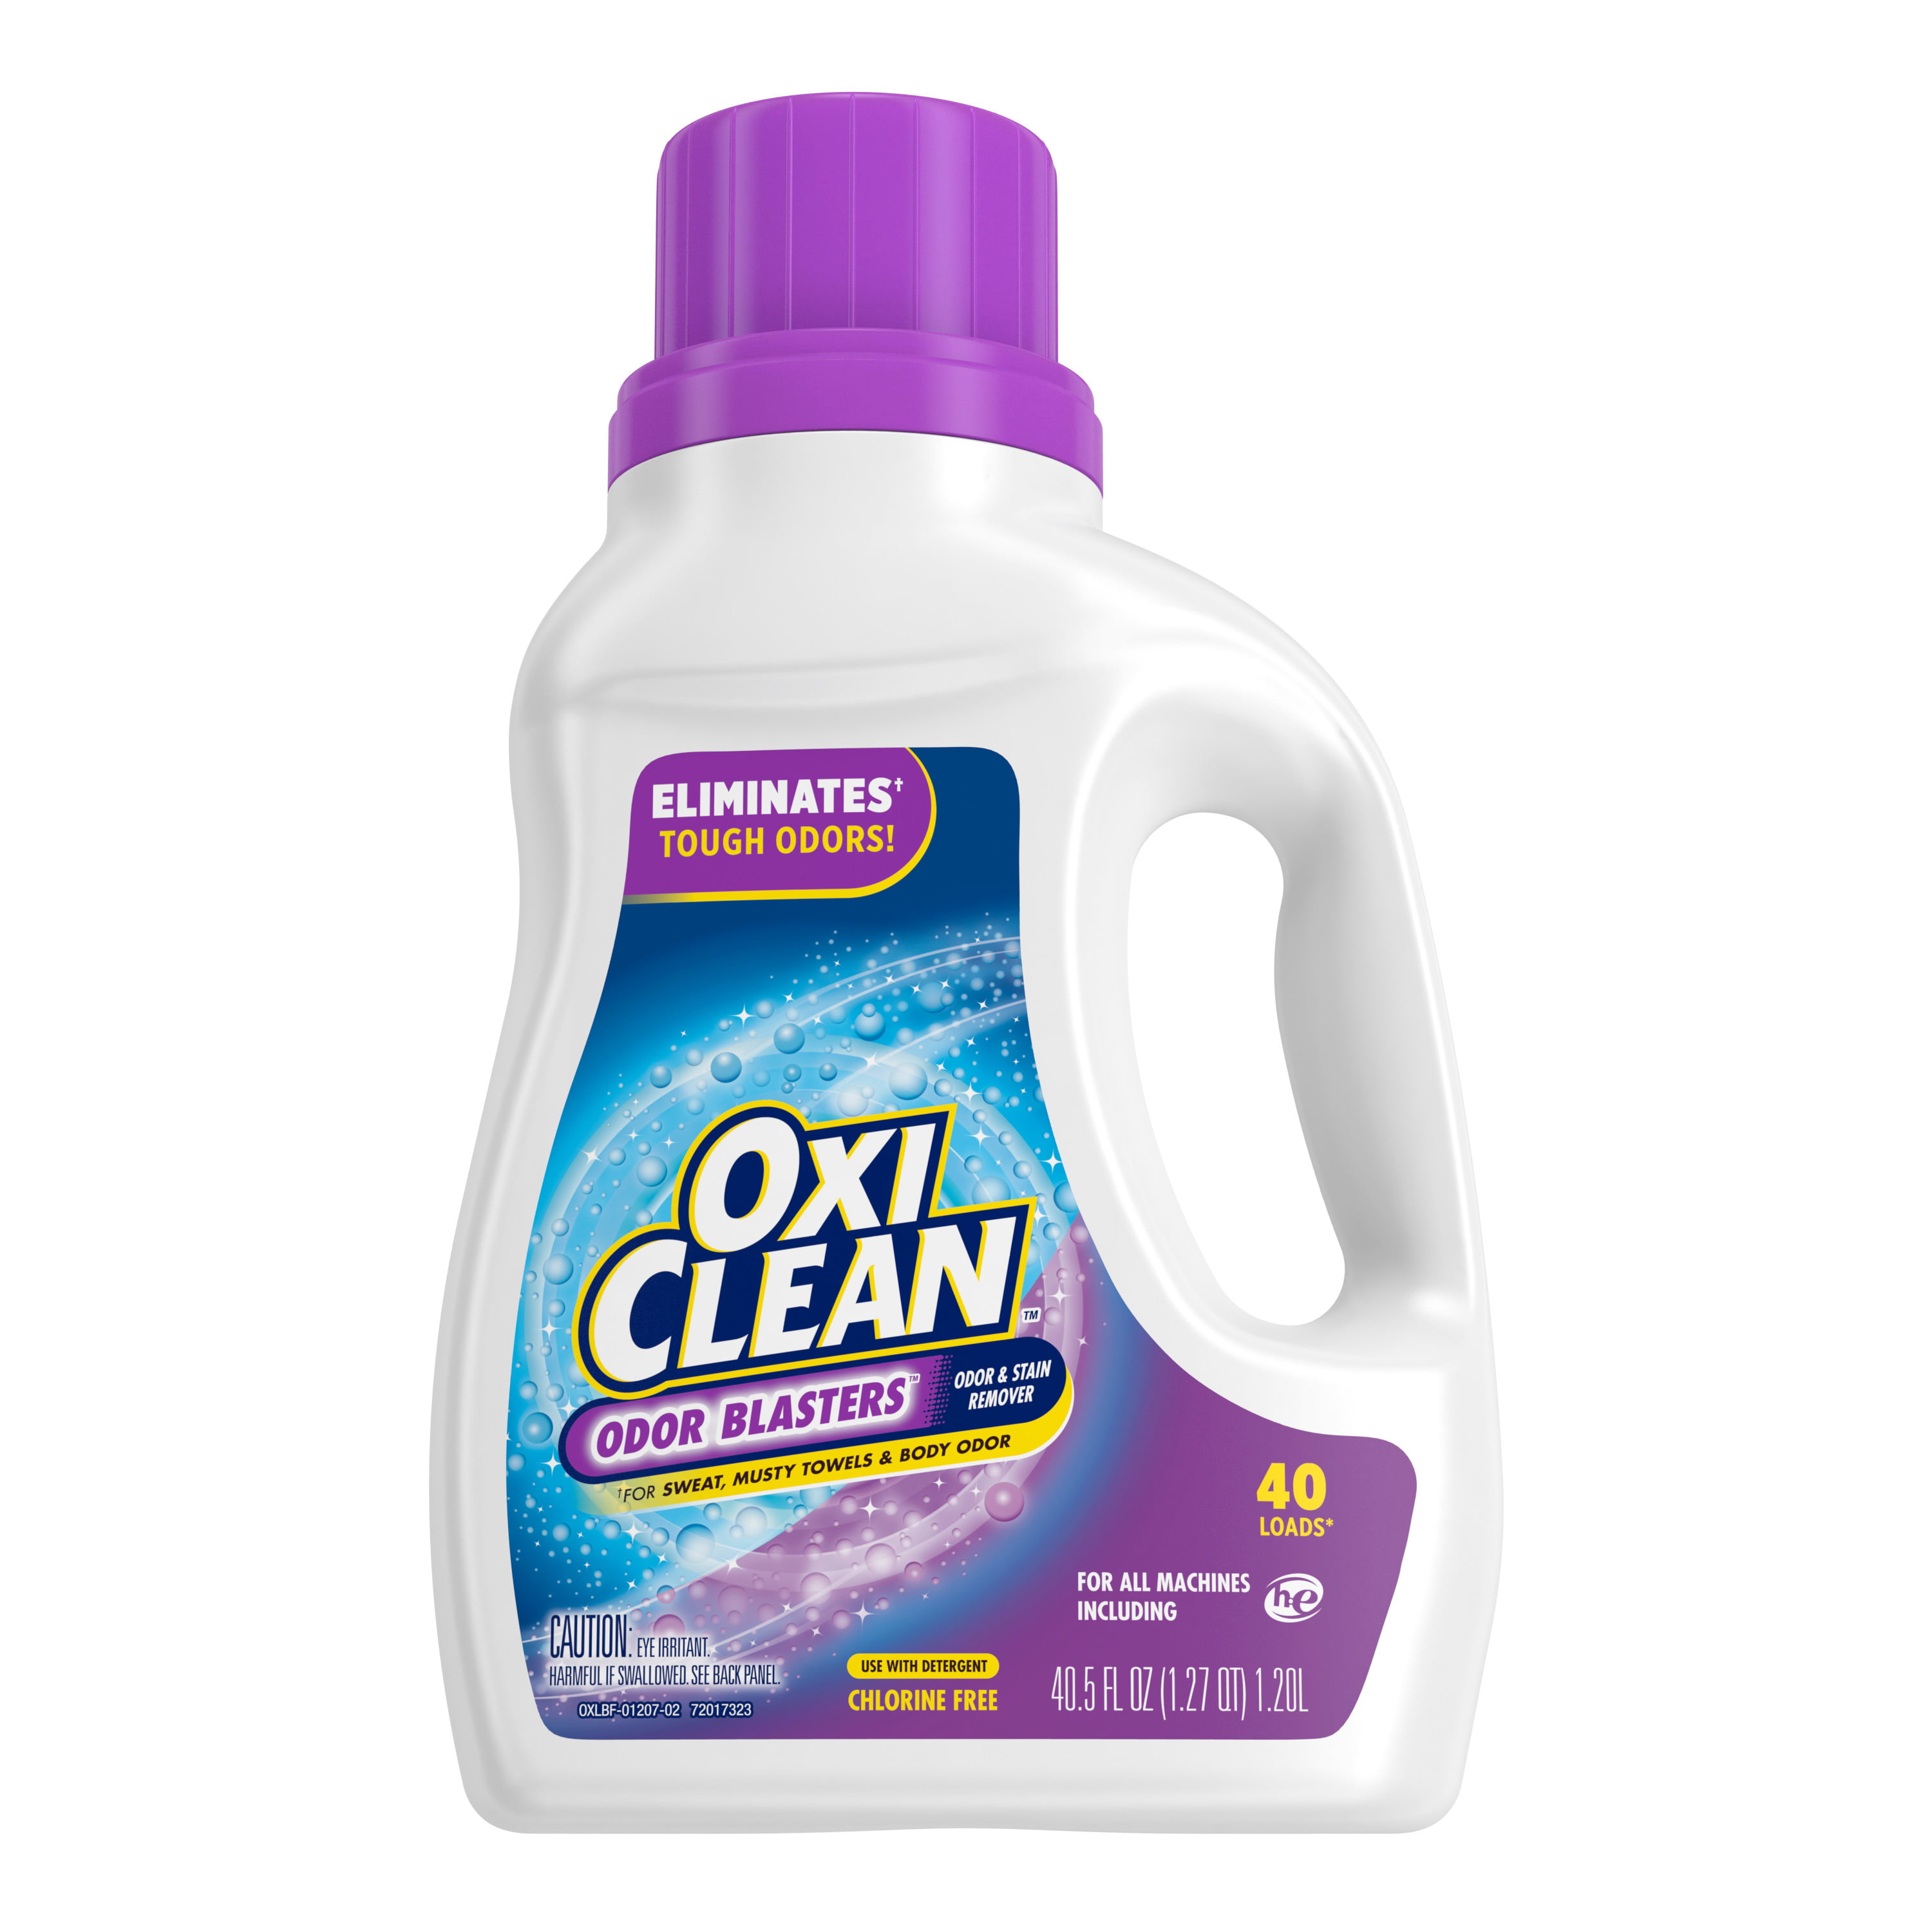 oxiclean-odor-blasters-odor-stain-remover-laundry-booster-40-5-oz